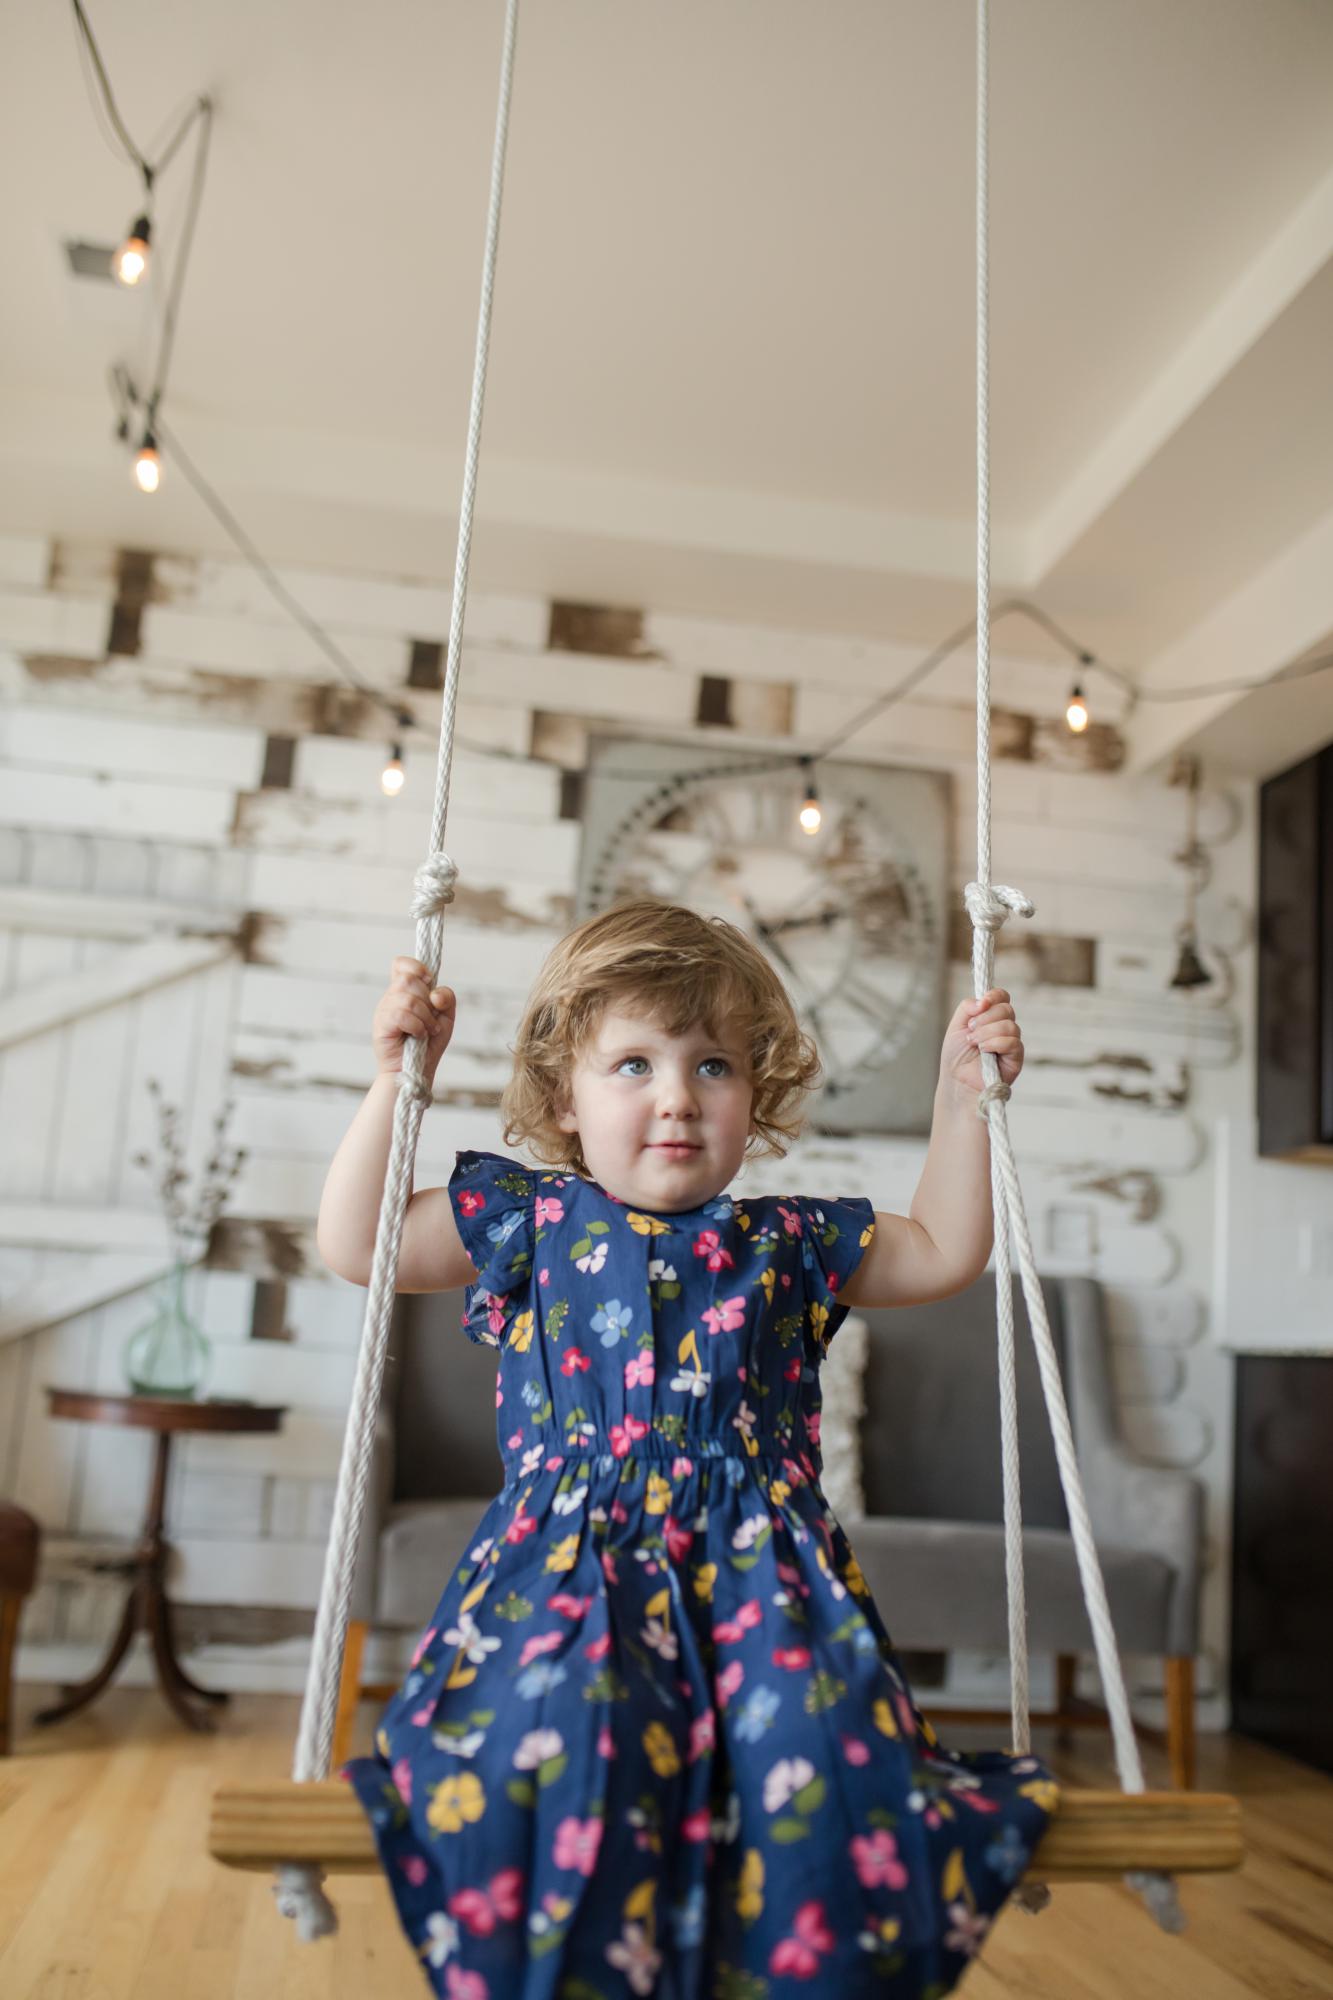 Young girl plays on swing in Colorado home